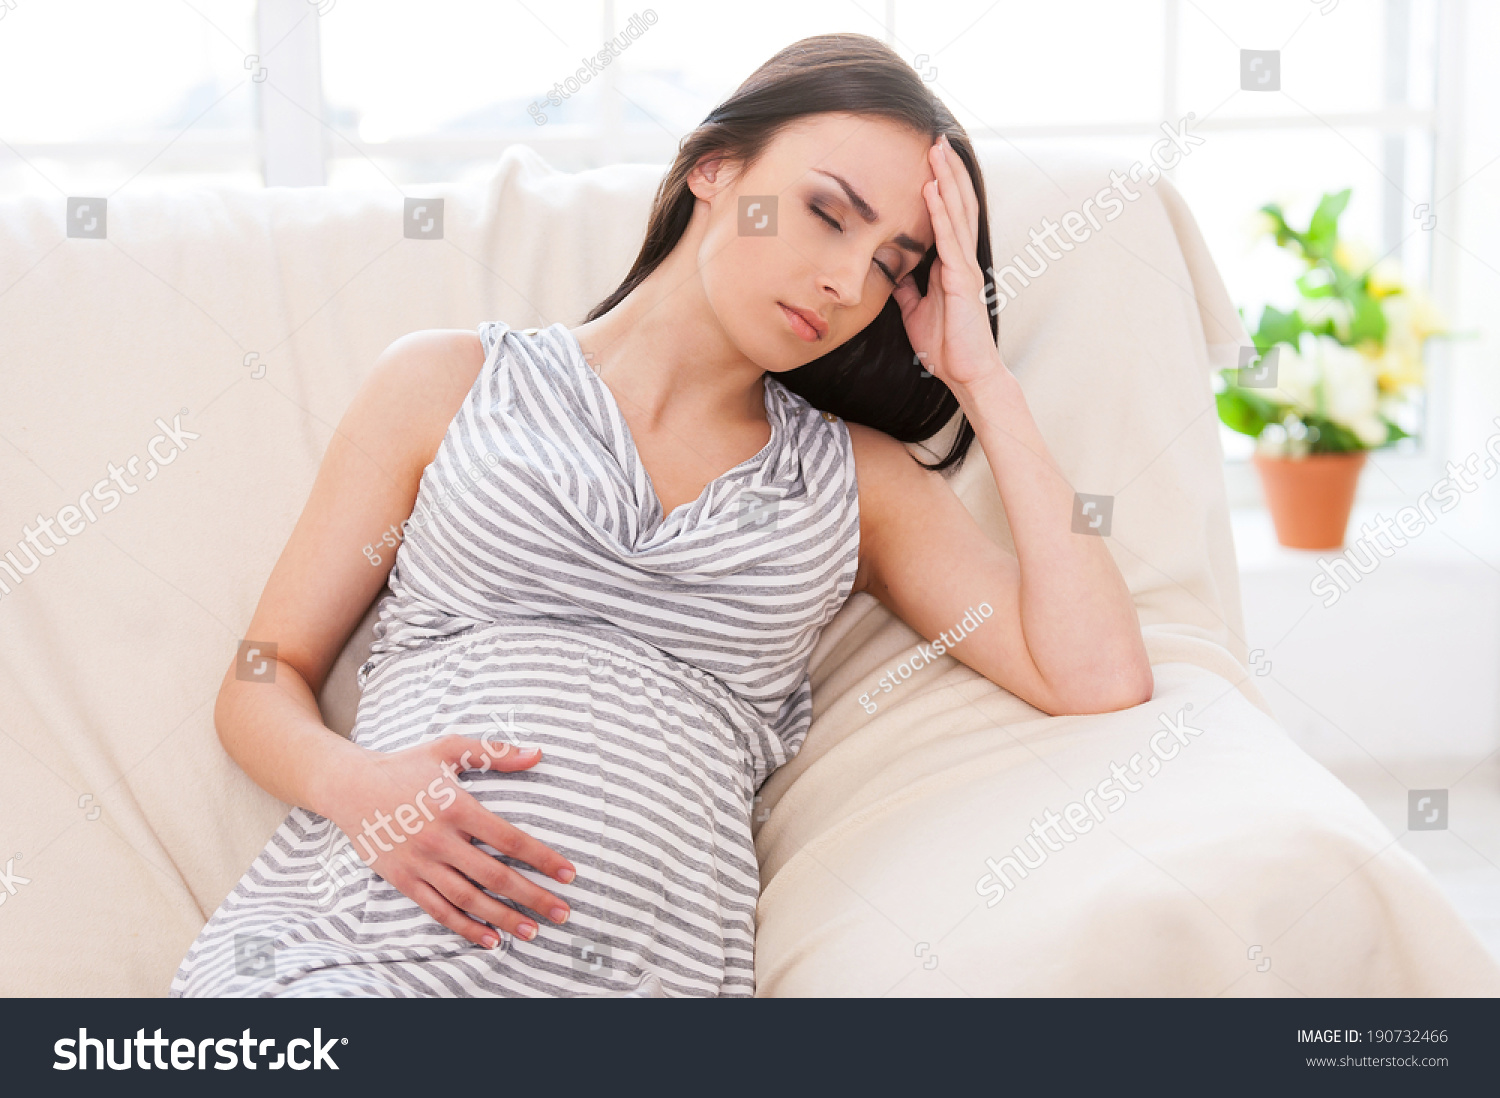 Struggling With Morning Sickness Depressed Pregnant Woman Holding Hand